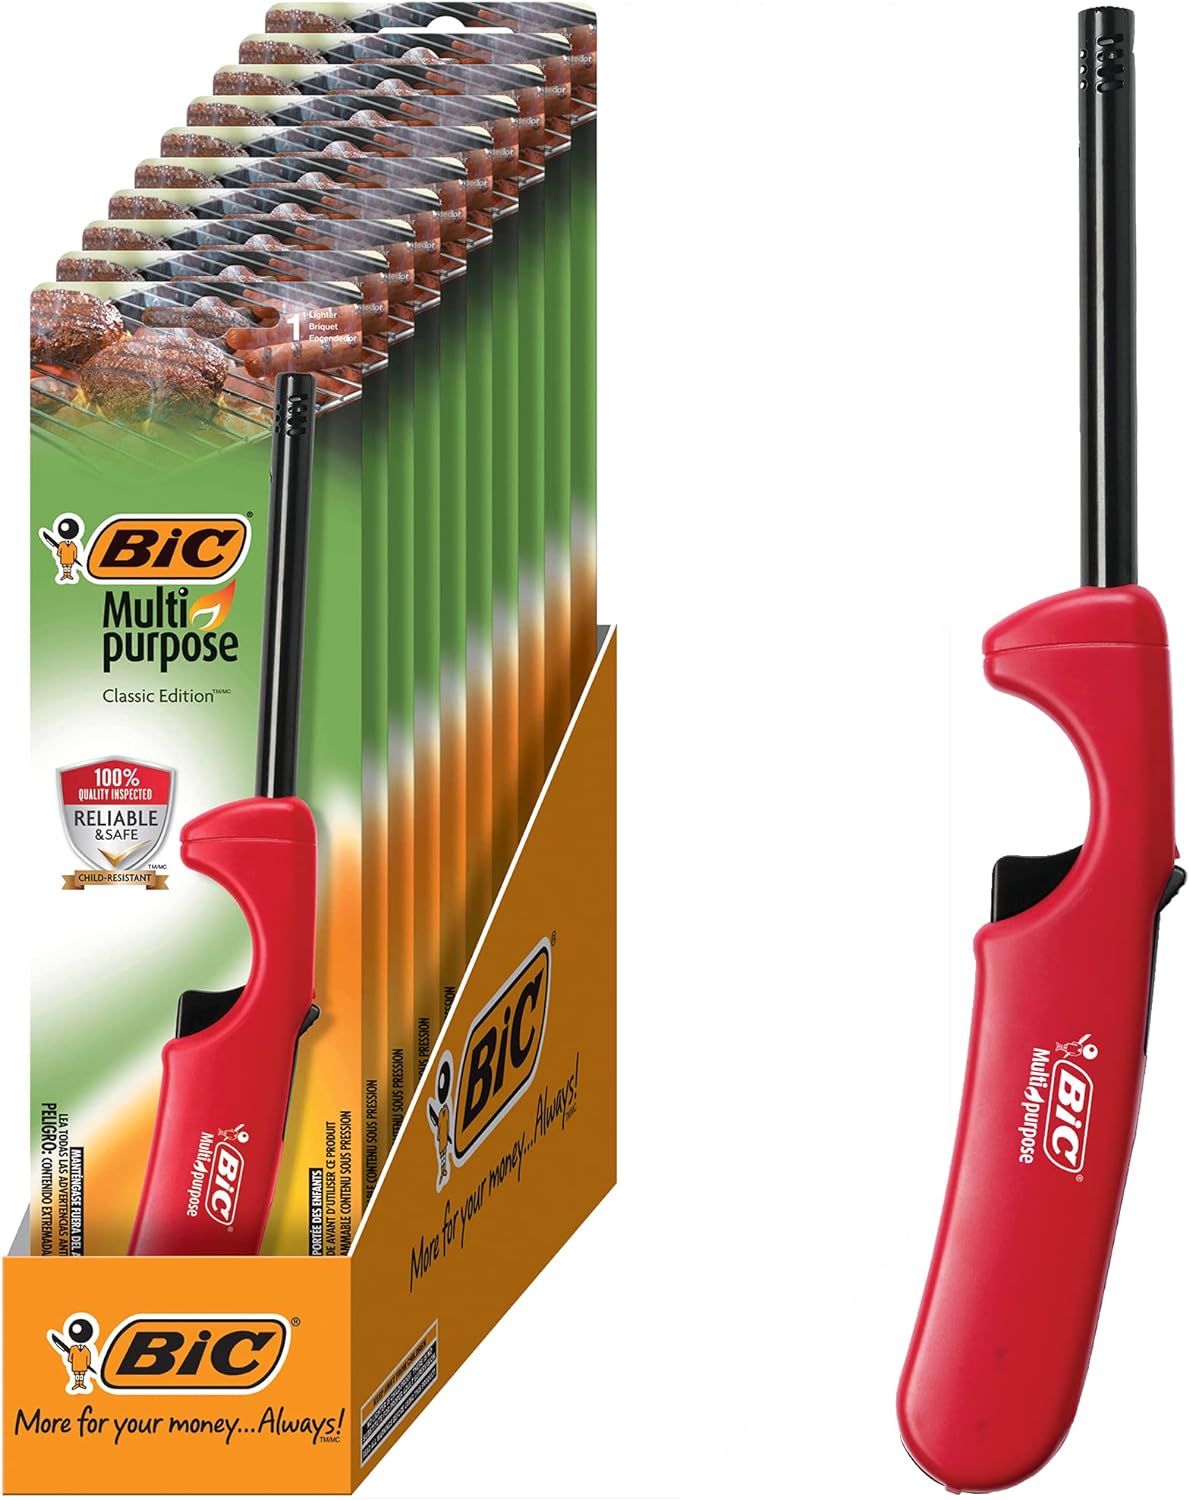 BIC Multi Purpose Lighter with Long Metal Wand, Classic Collection, Great Lighter for Candles, Grills and Fireplaces, 10 Count Pack of Lighters